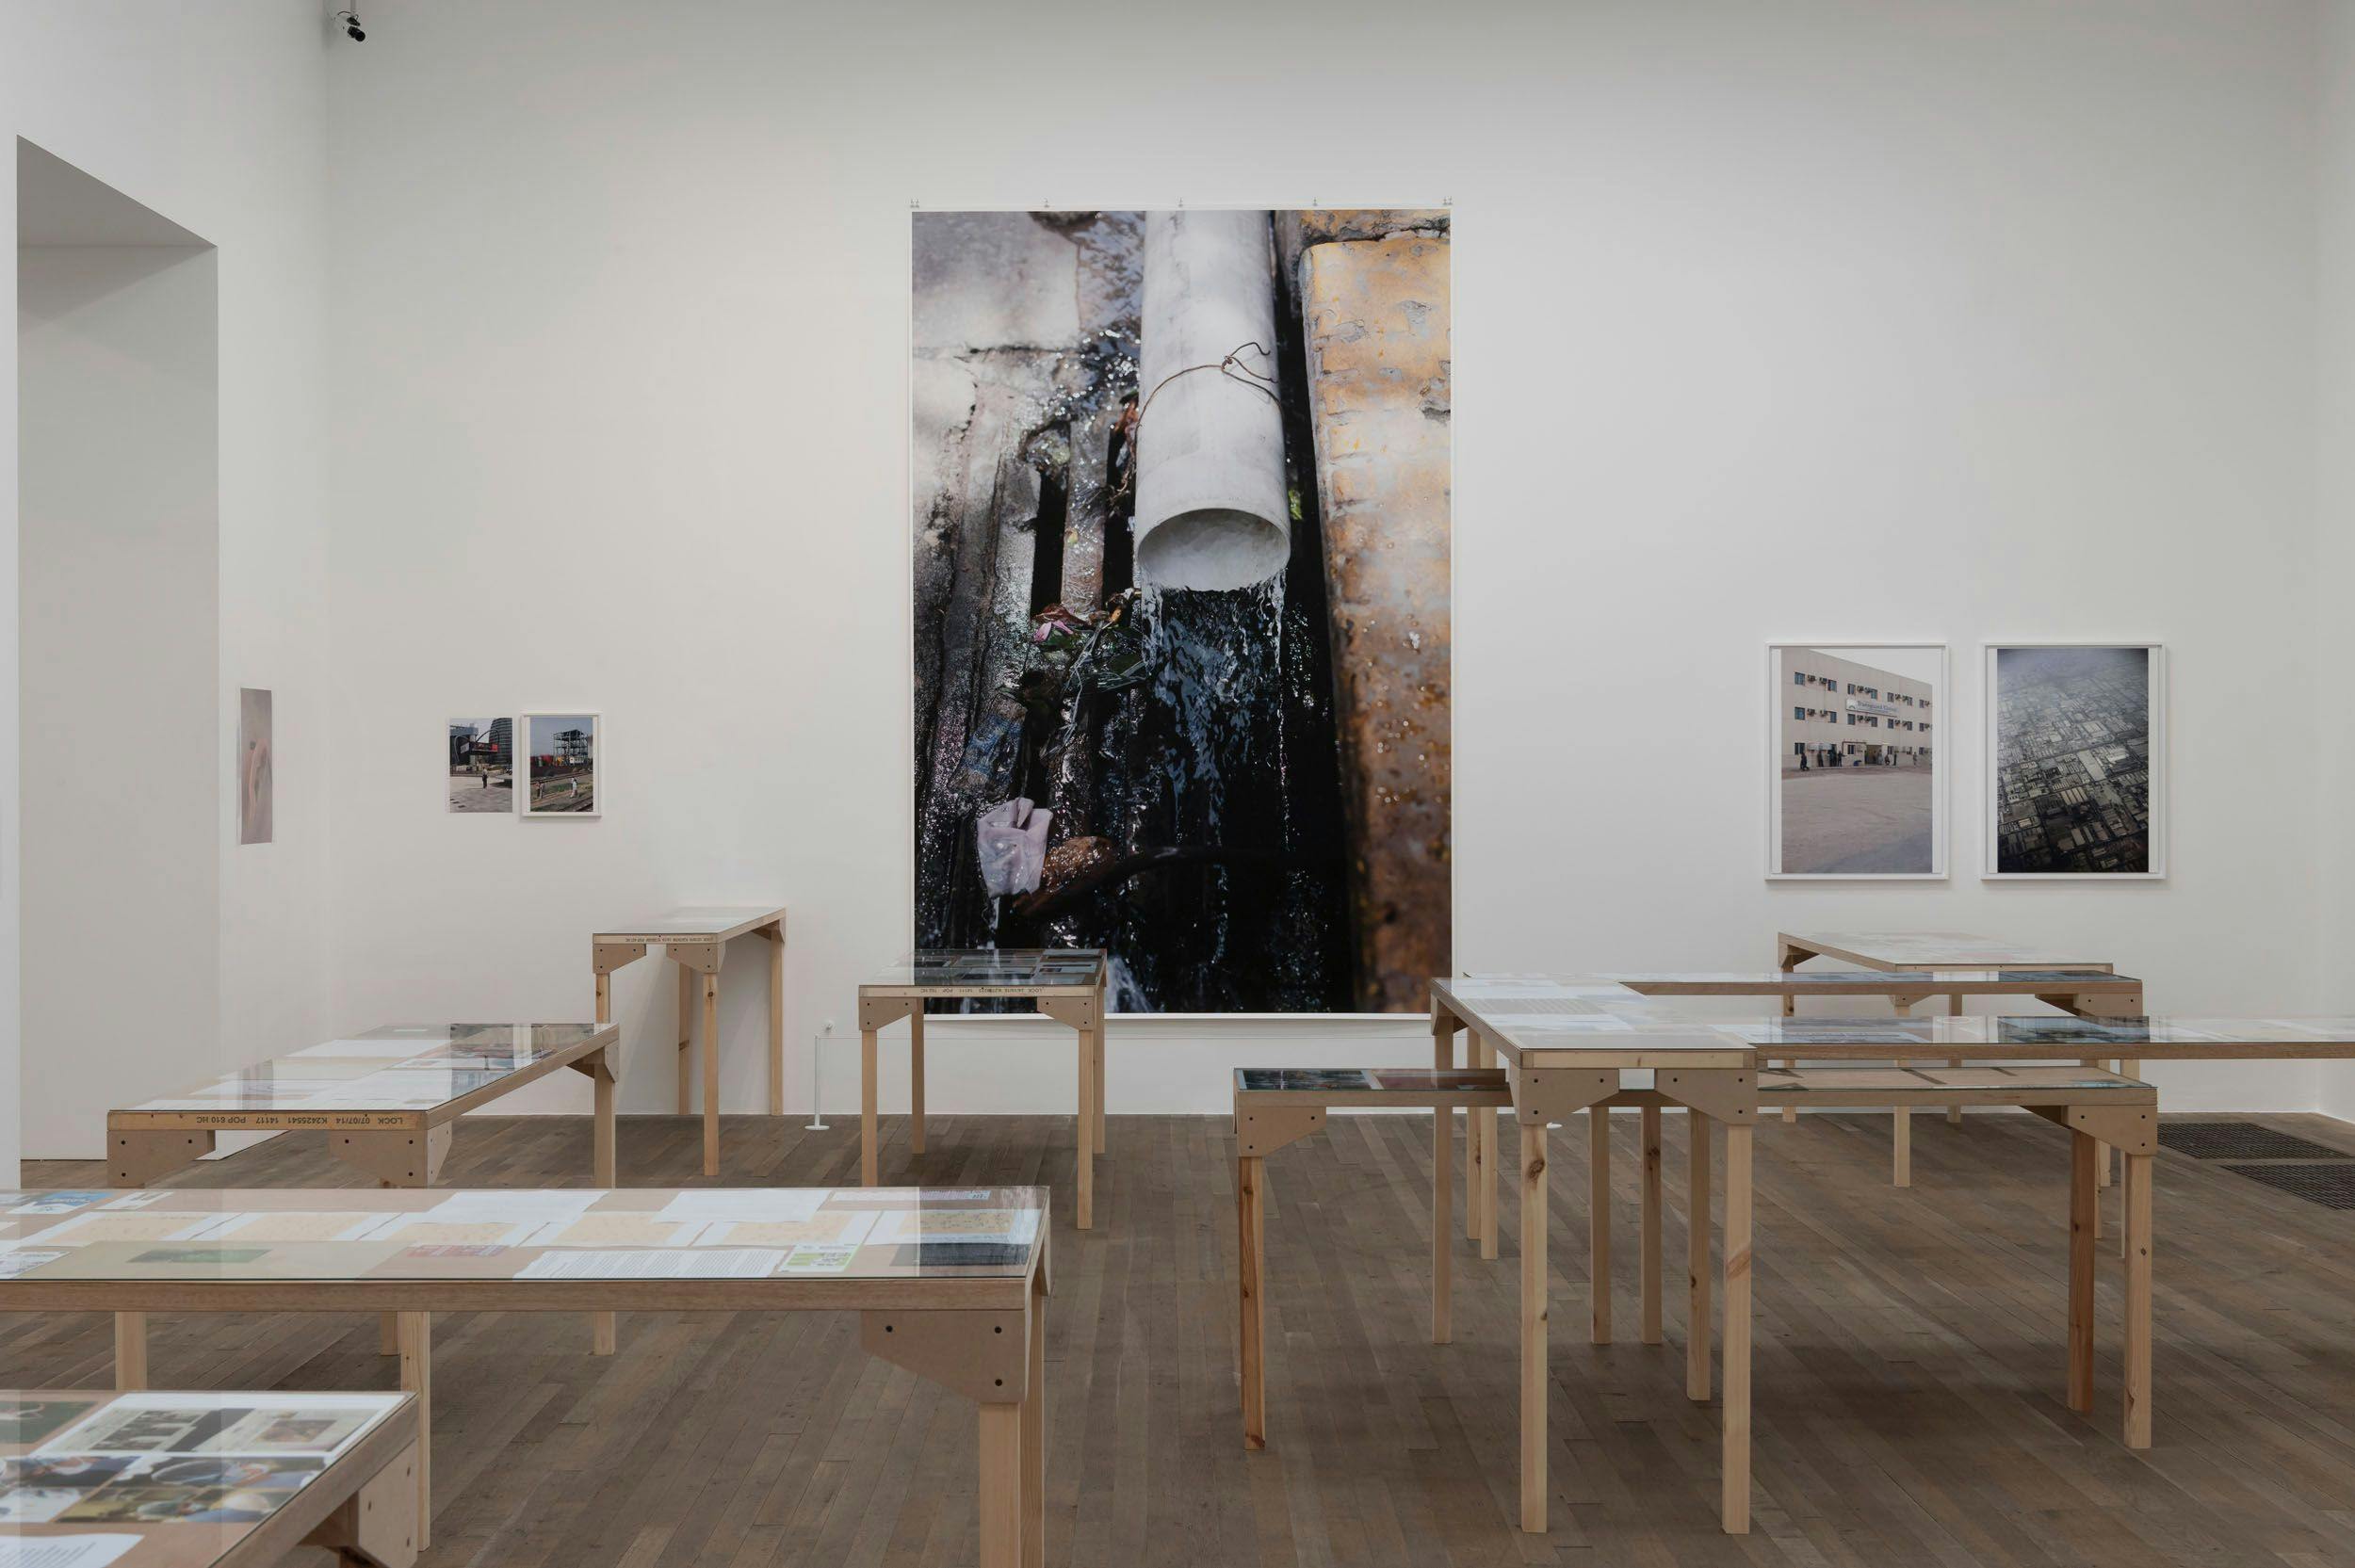 Installation view of the exhibition Wolfgang Tillmans: 2017 at Tate Modern, in London, dated 2017.